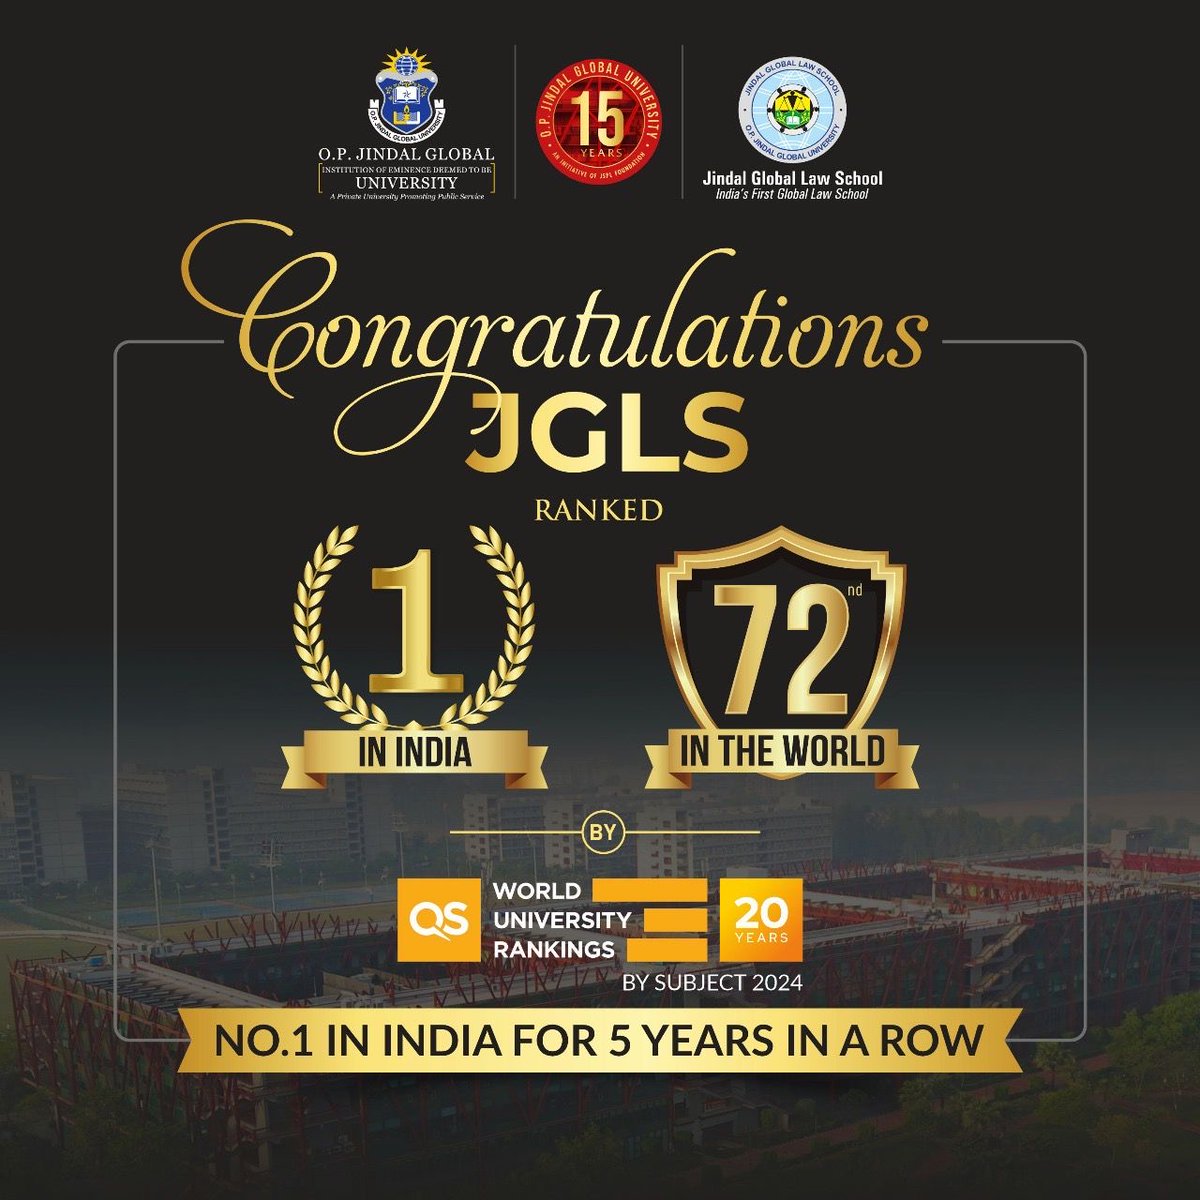 A massive salute to Jindal Global Law School from my side. The school ranks no. 1 in India for the fifth time around. #JGLSQSRankings